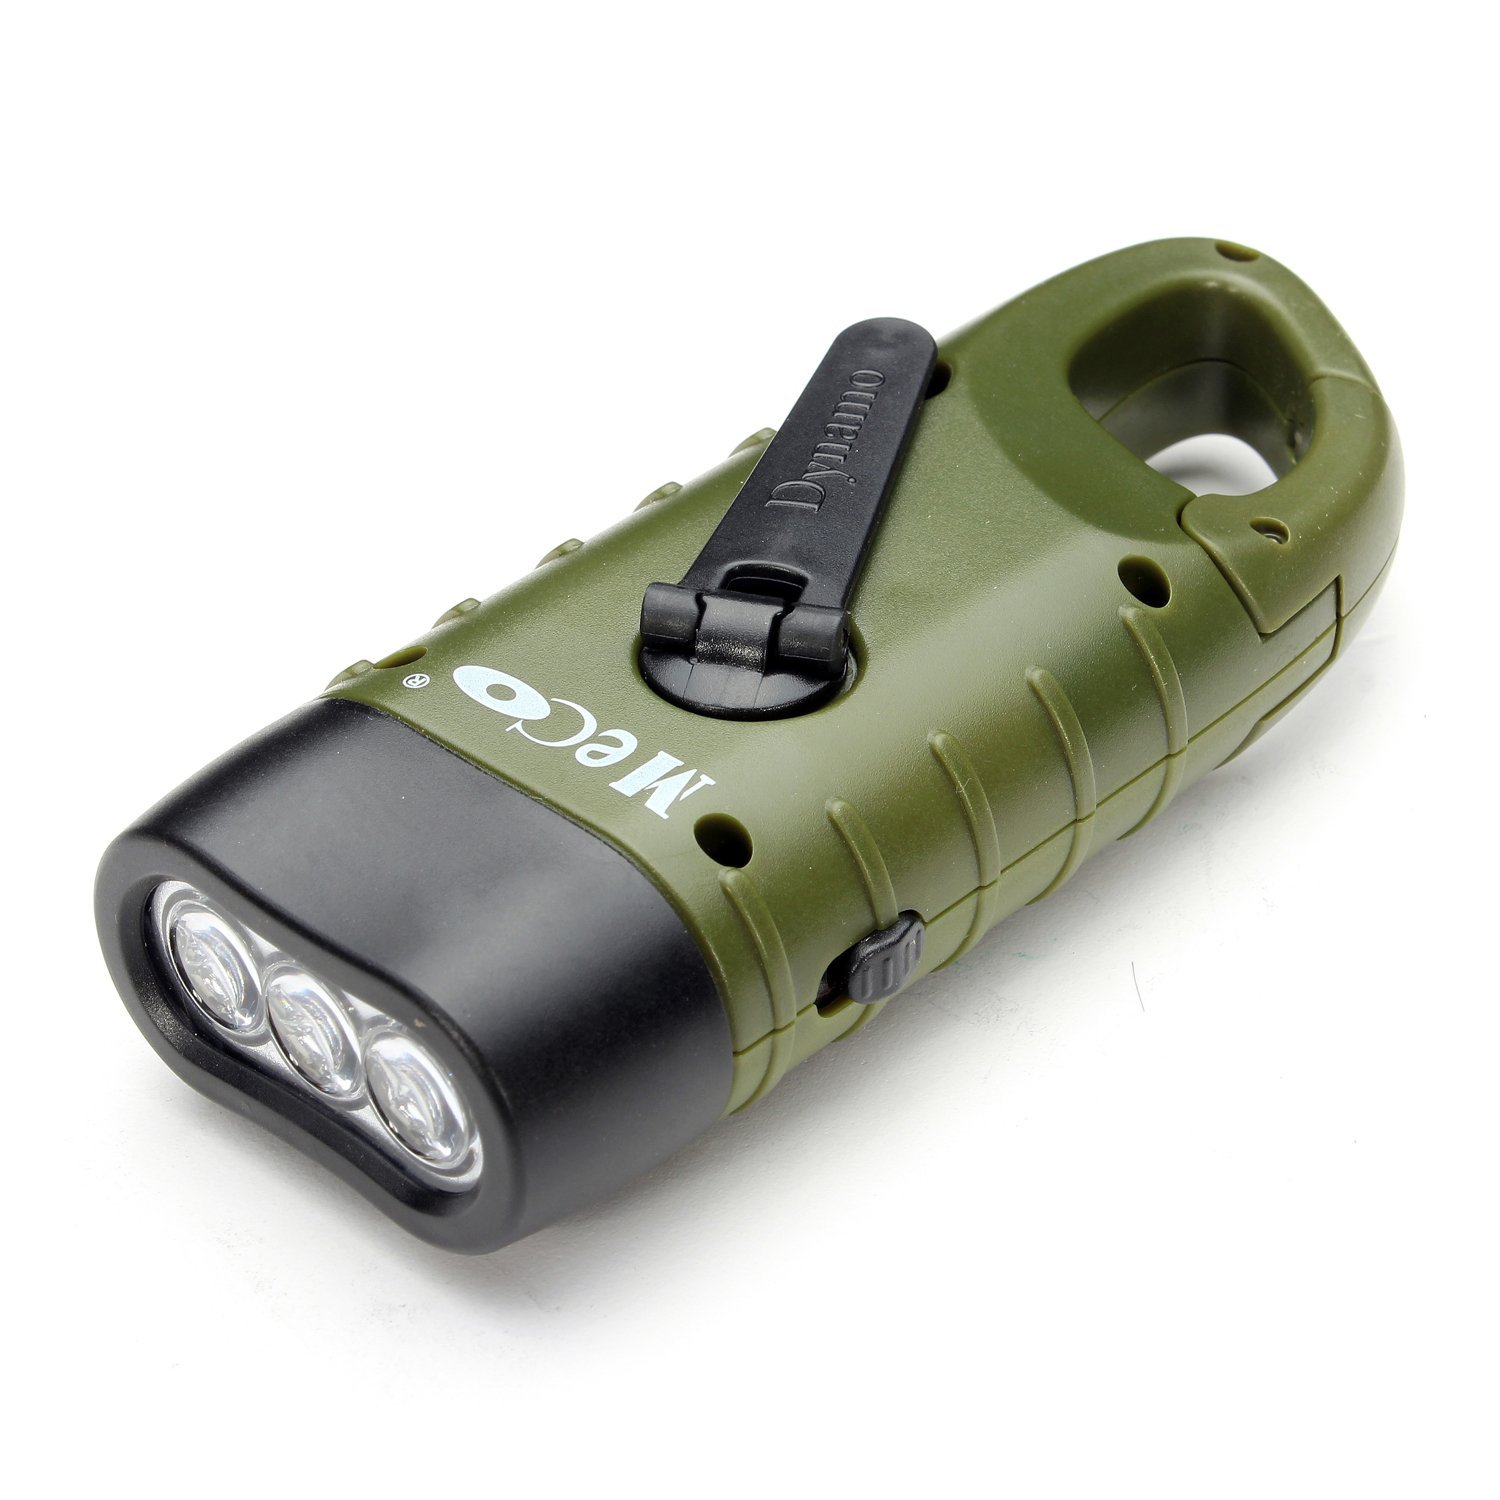 Emergency Hand Cranking & Solar Powered Rechargeable Flashlight Only $9.99 on Amazon! Add To Your 72 Hour Kits!